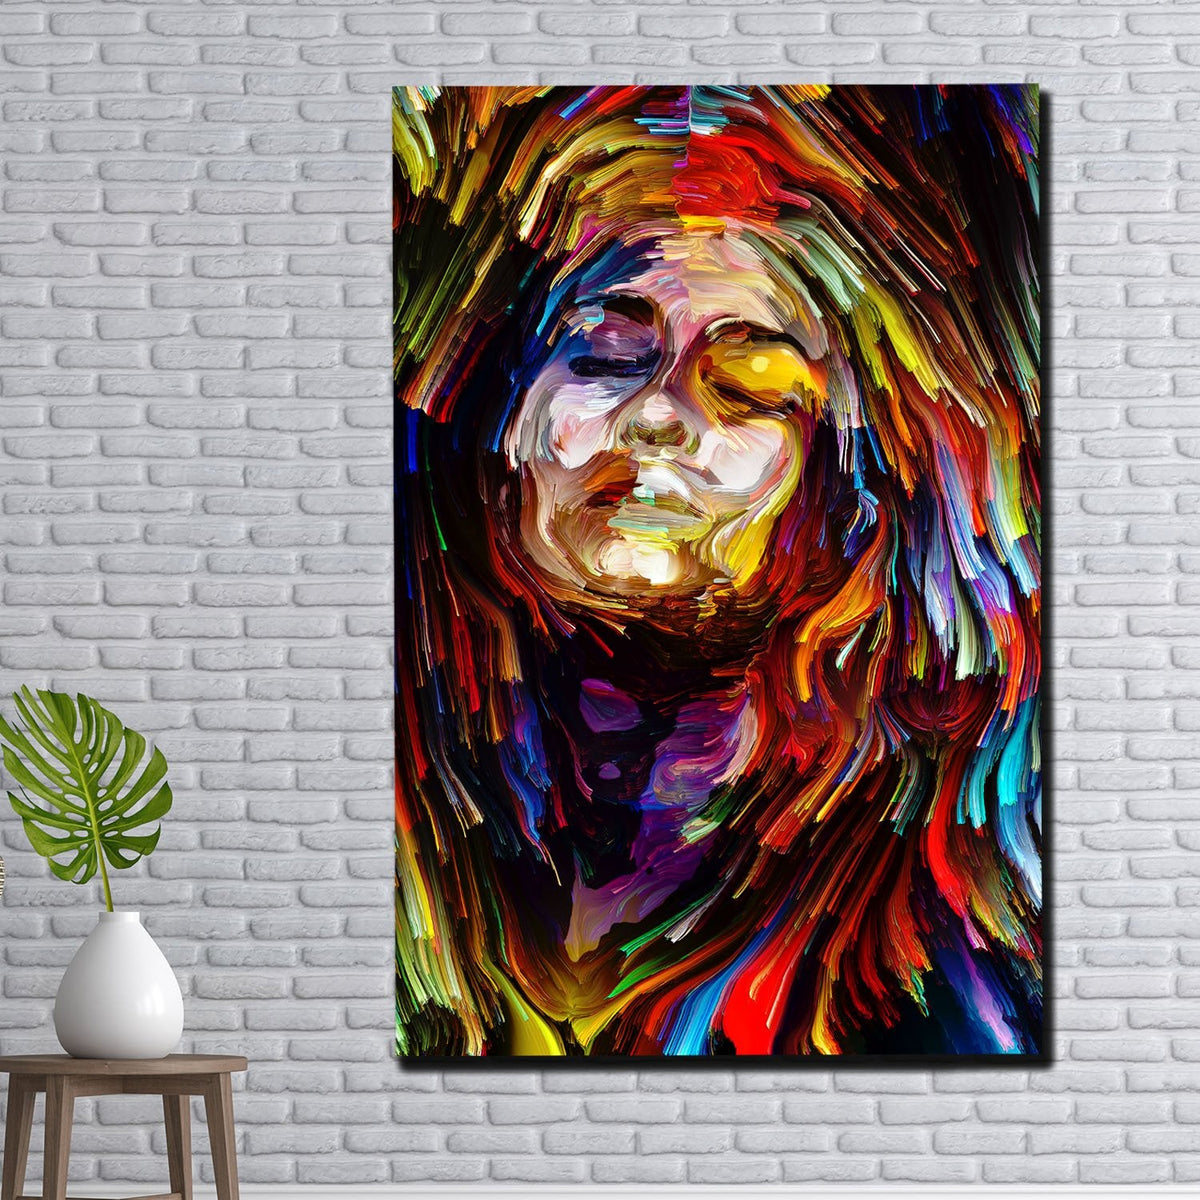 https://cdn.shopify.com/s/files/1/0387/9986/8044/products/WomaninSlumberCanvasPrintStretched-4.jpg